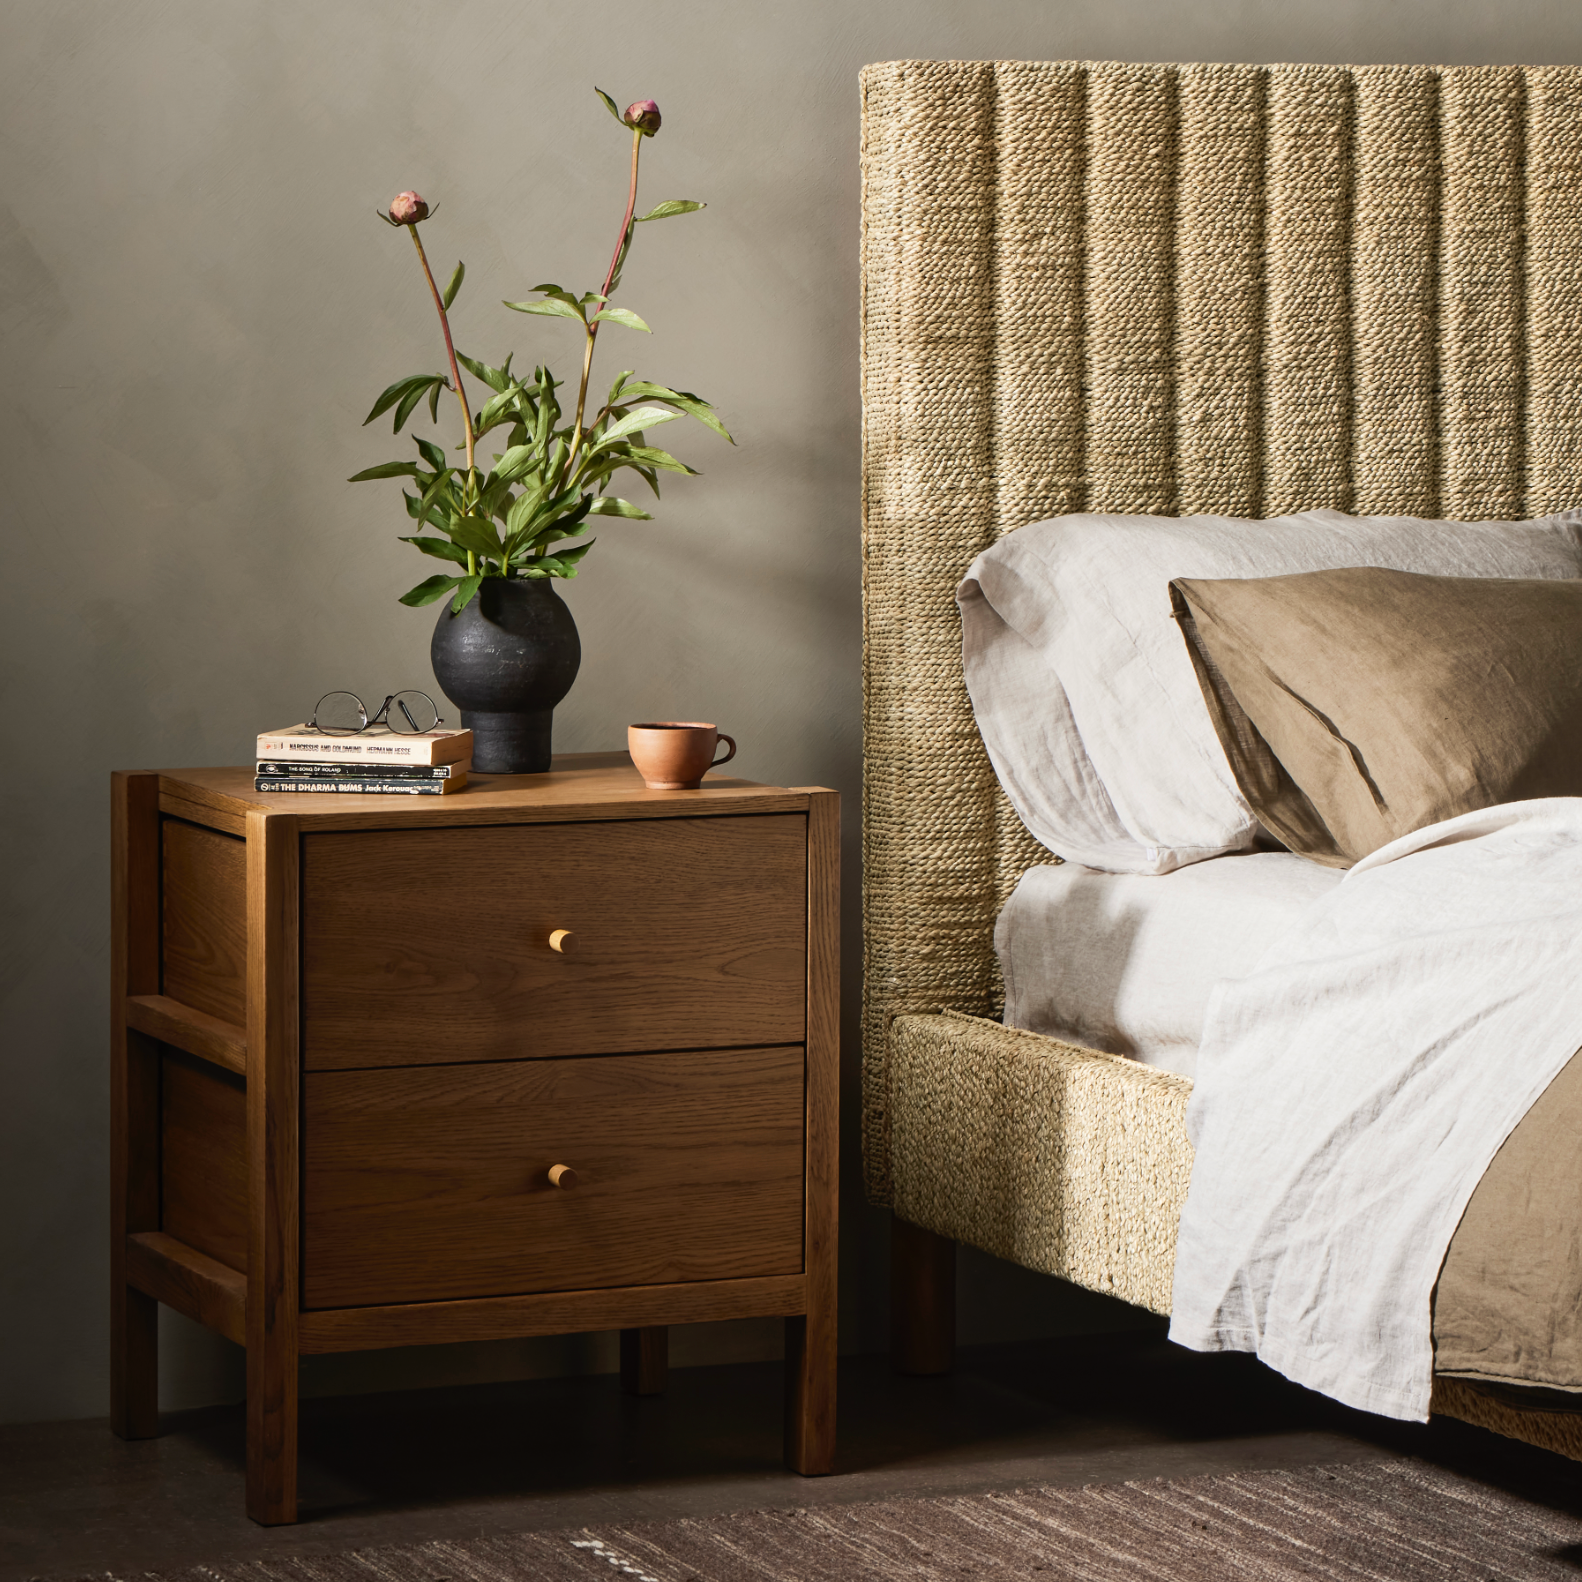 With simple shaping inspired by midcentury casing, exposed framework and a warm oak finish bring a handcrafted, minimalist look to stylish bedside storage. Amethyst Home provides interior design, new home construction design consulting, vintage area rugs, and lighting in the Chicago metro area.